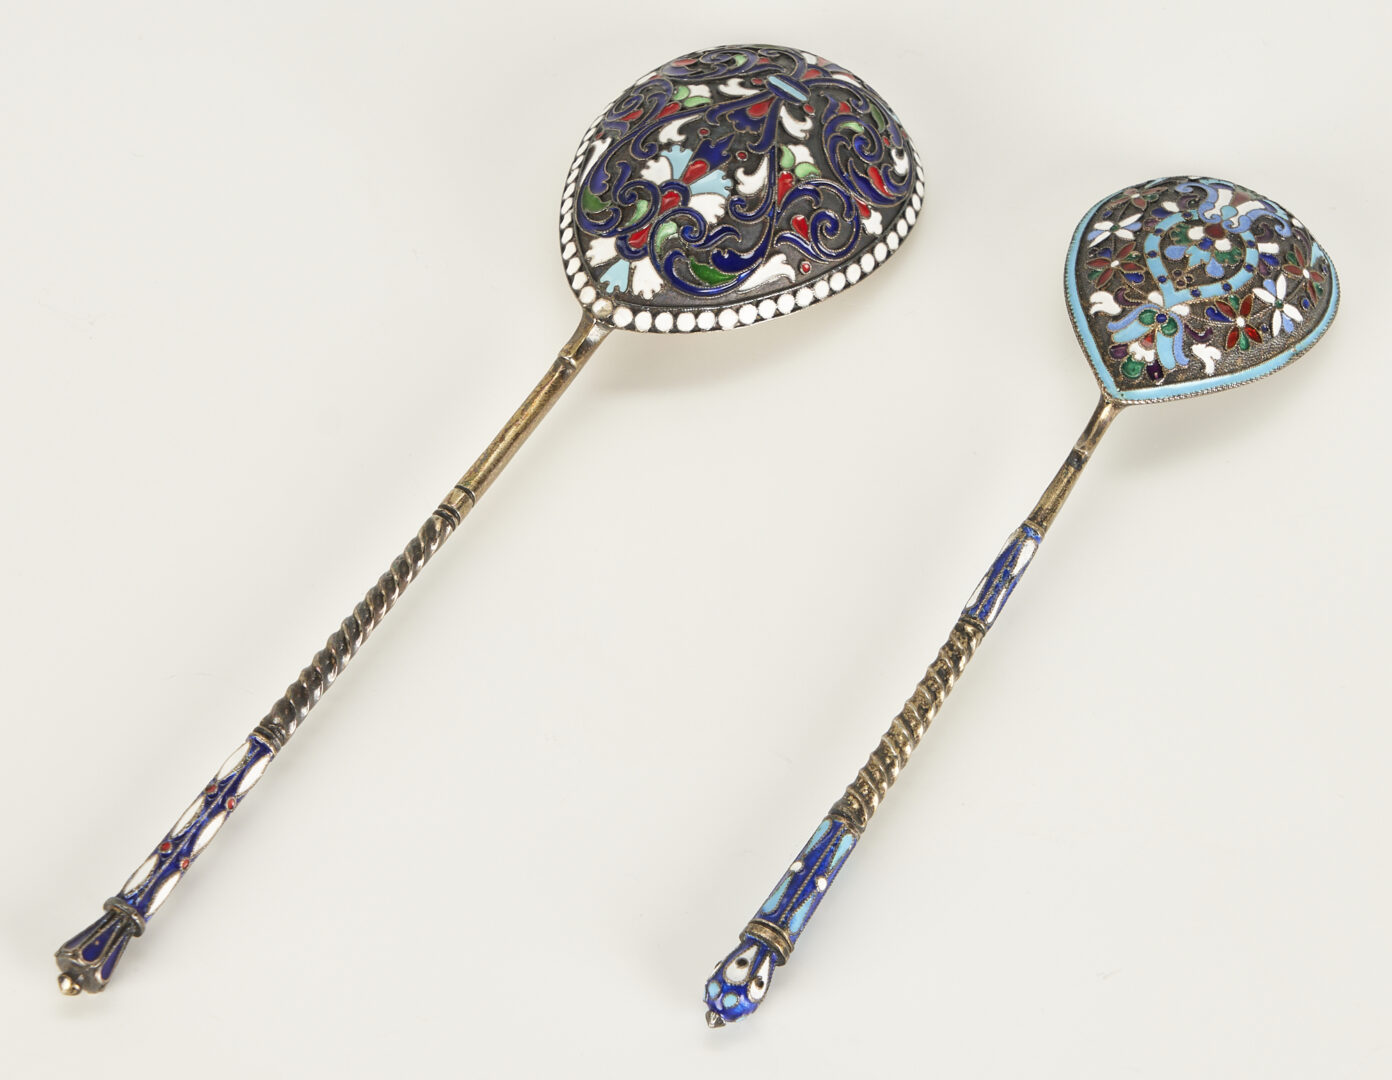 Lot 49: 8 Russian Enameled Silver Gilt Spoons